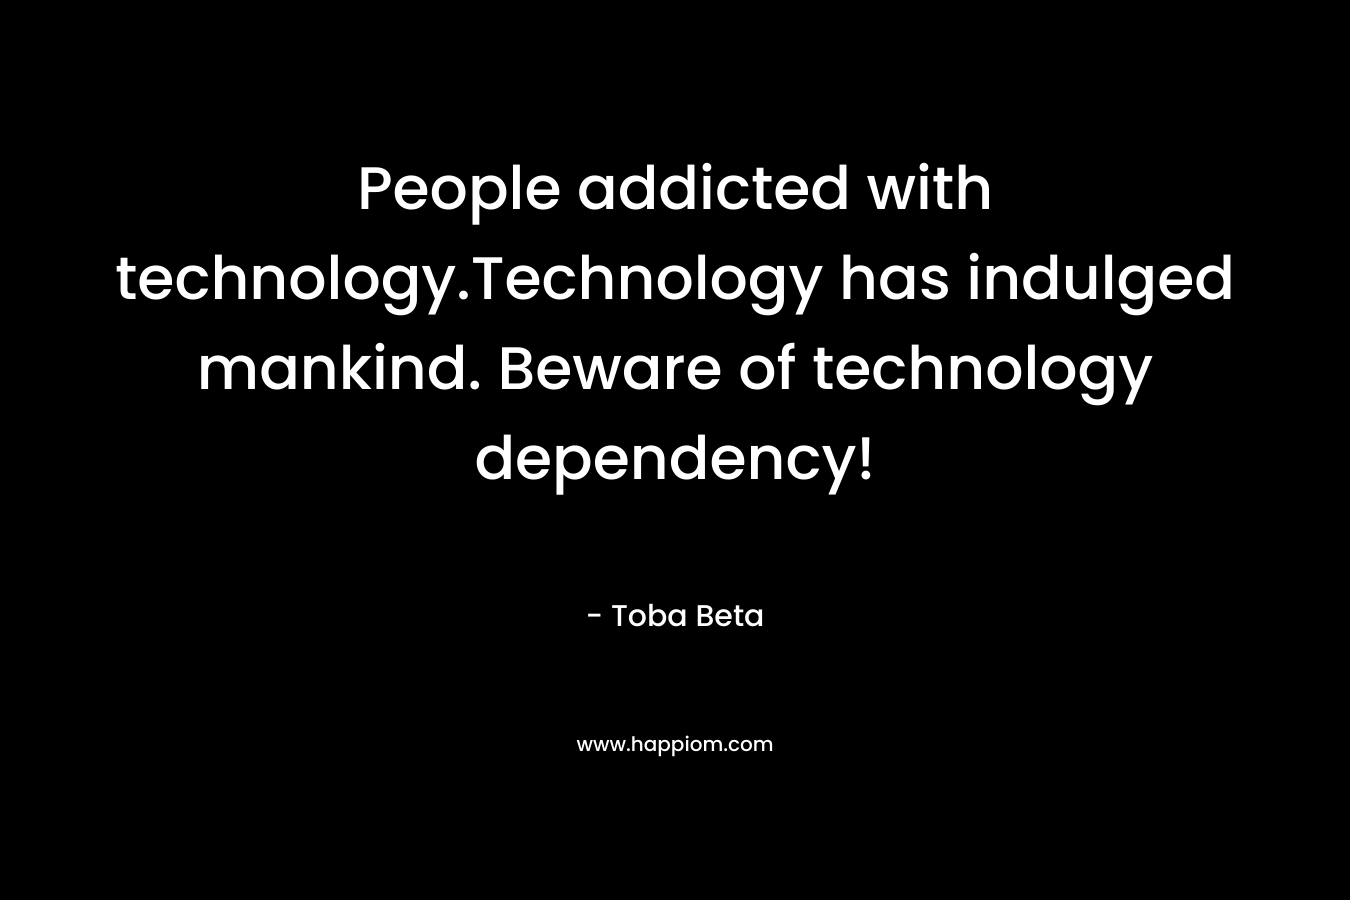 People addicted with technology.Technology has indulged mankind. Beware of technology dependency! – Toba Beta